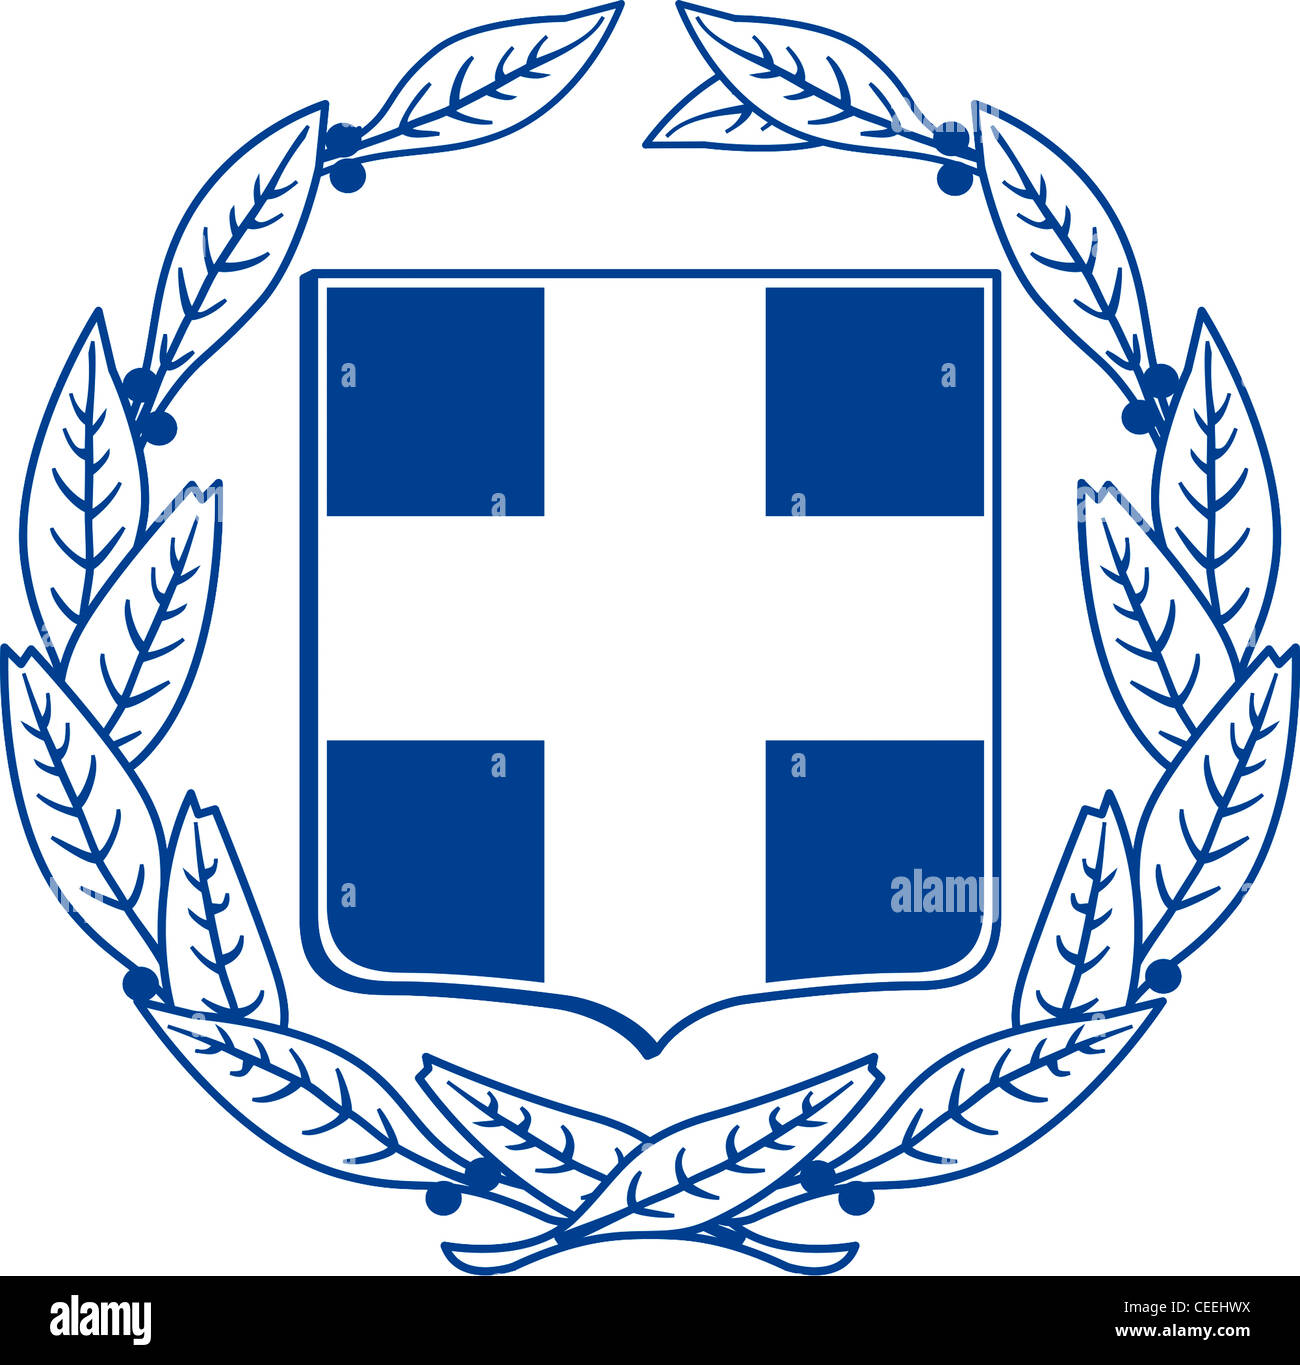 Coat of arms of the Republic of Greece. Stock Photo